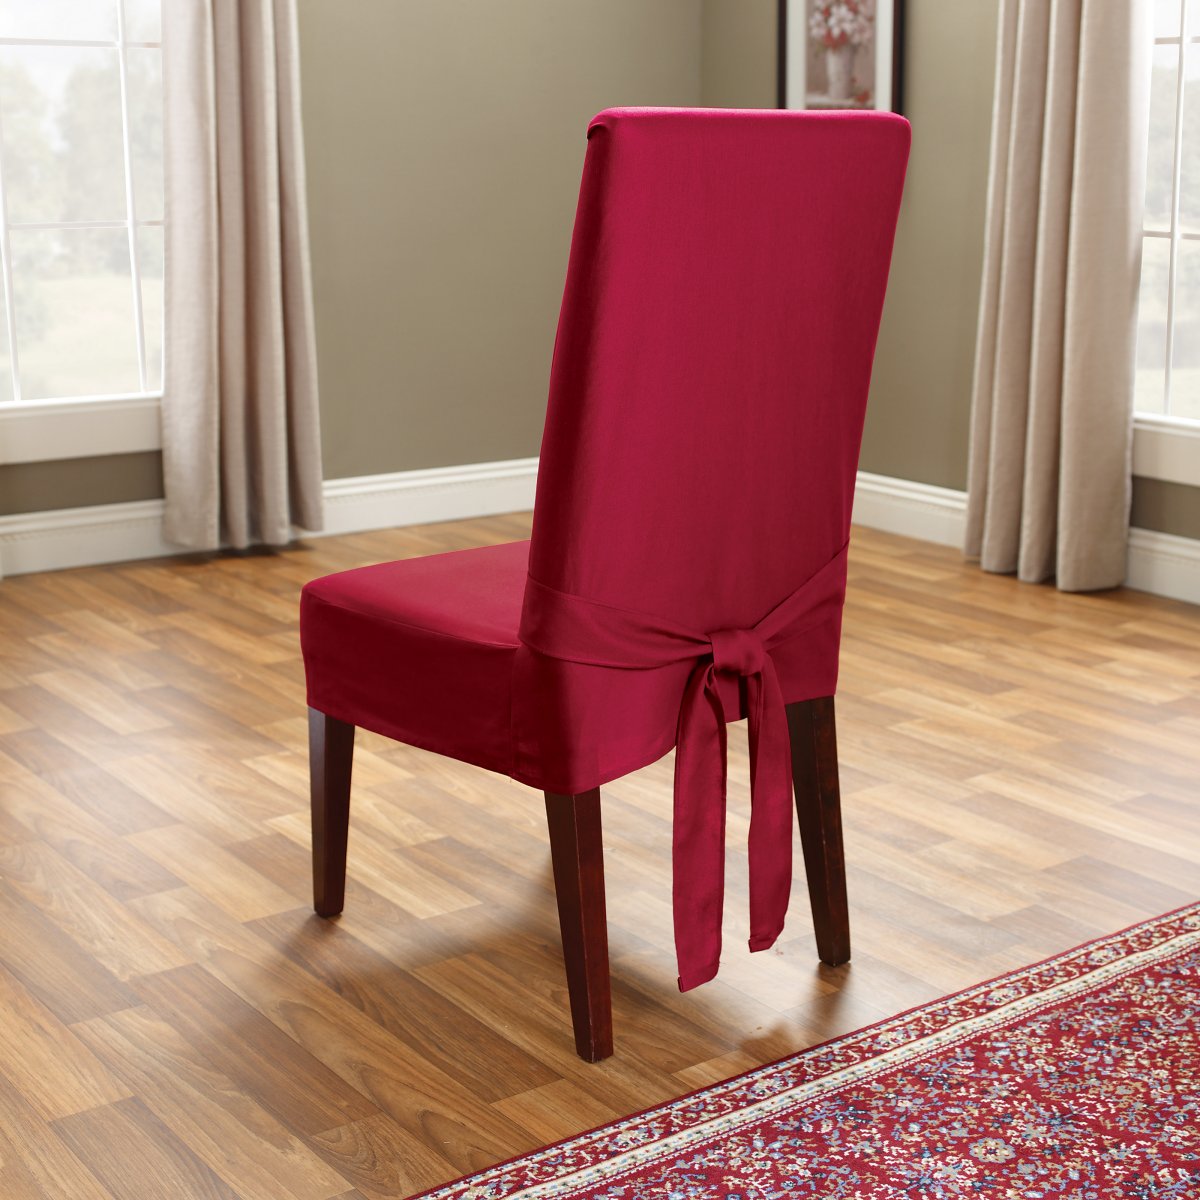 dining room chair cover photo - 2